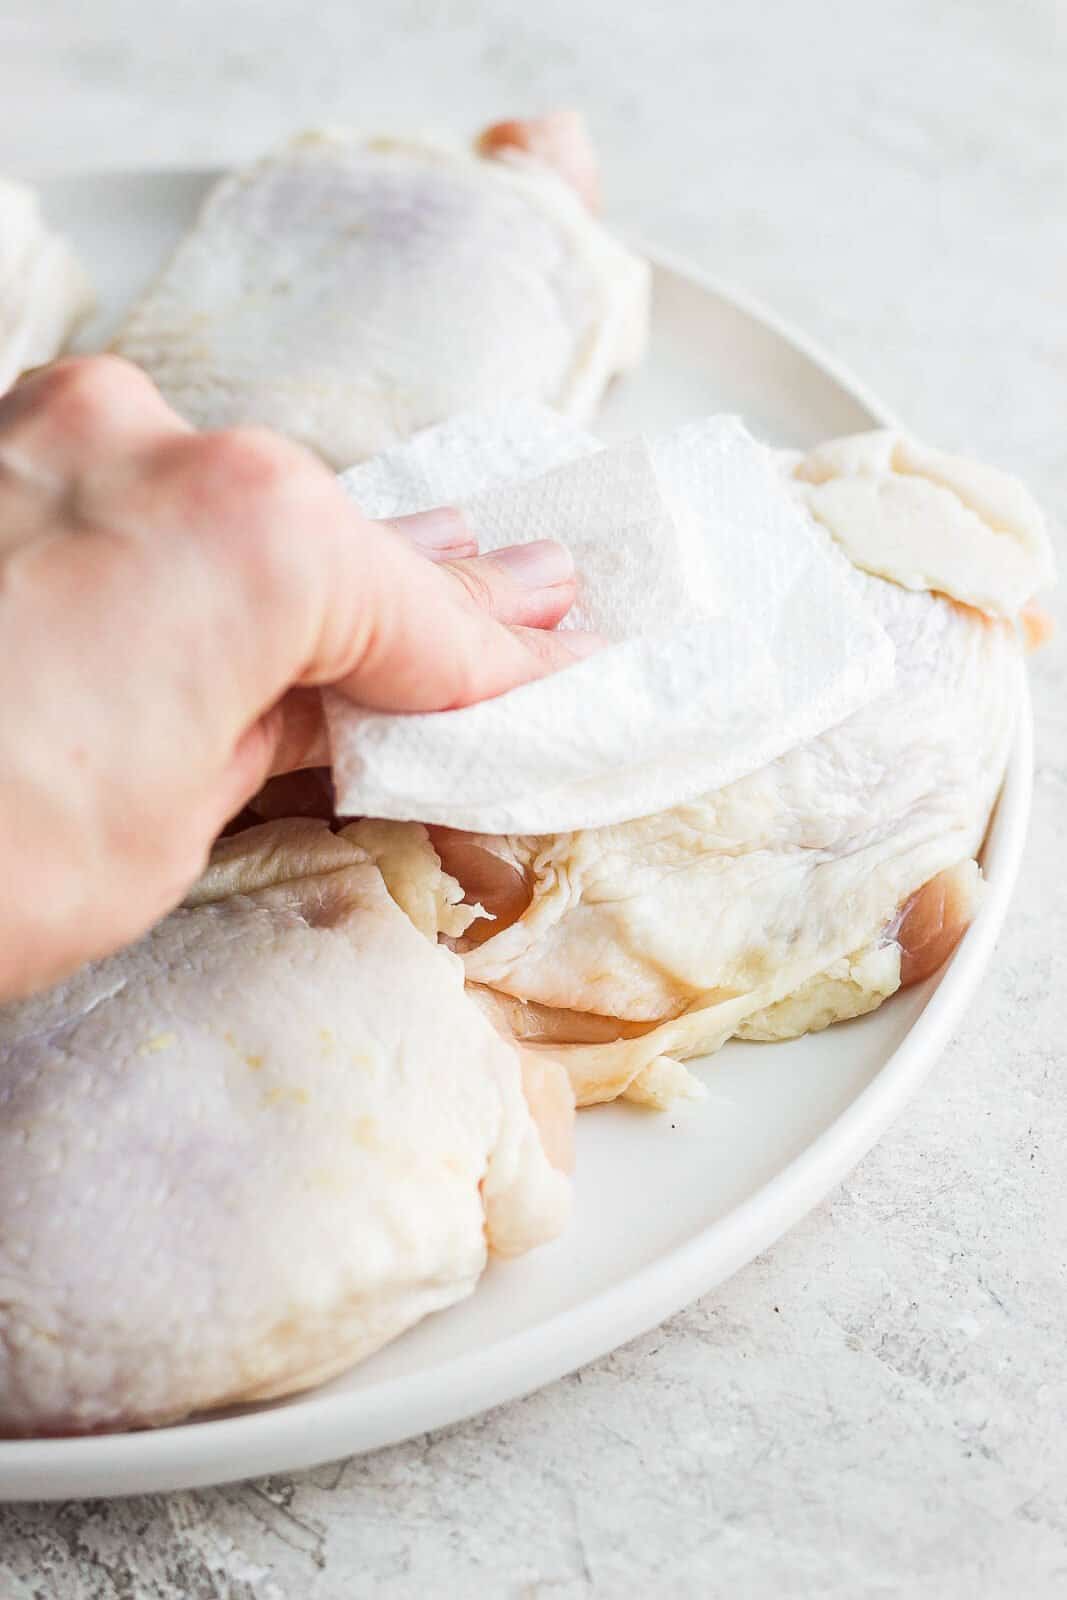 Patting chicken dry with a paper towel.